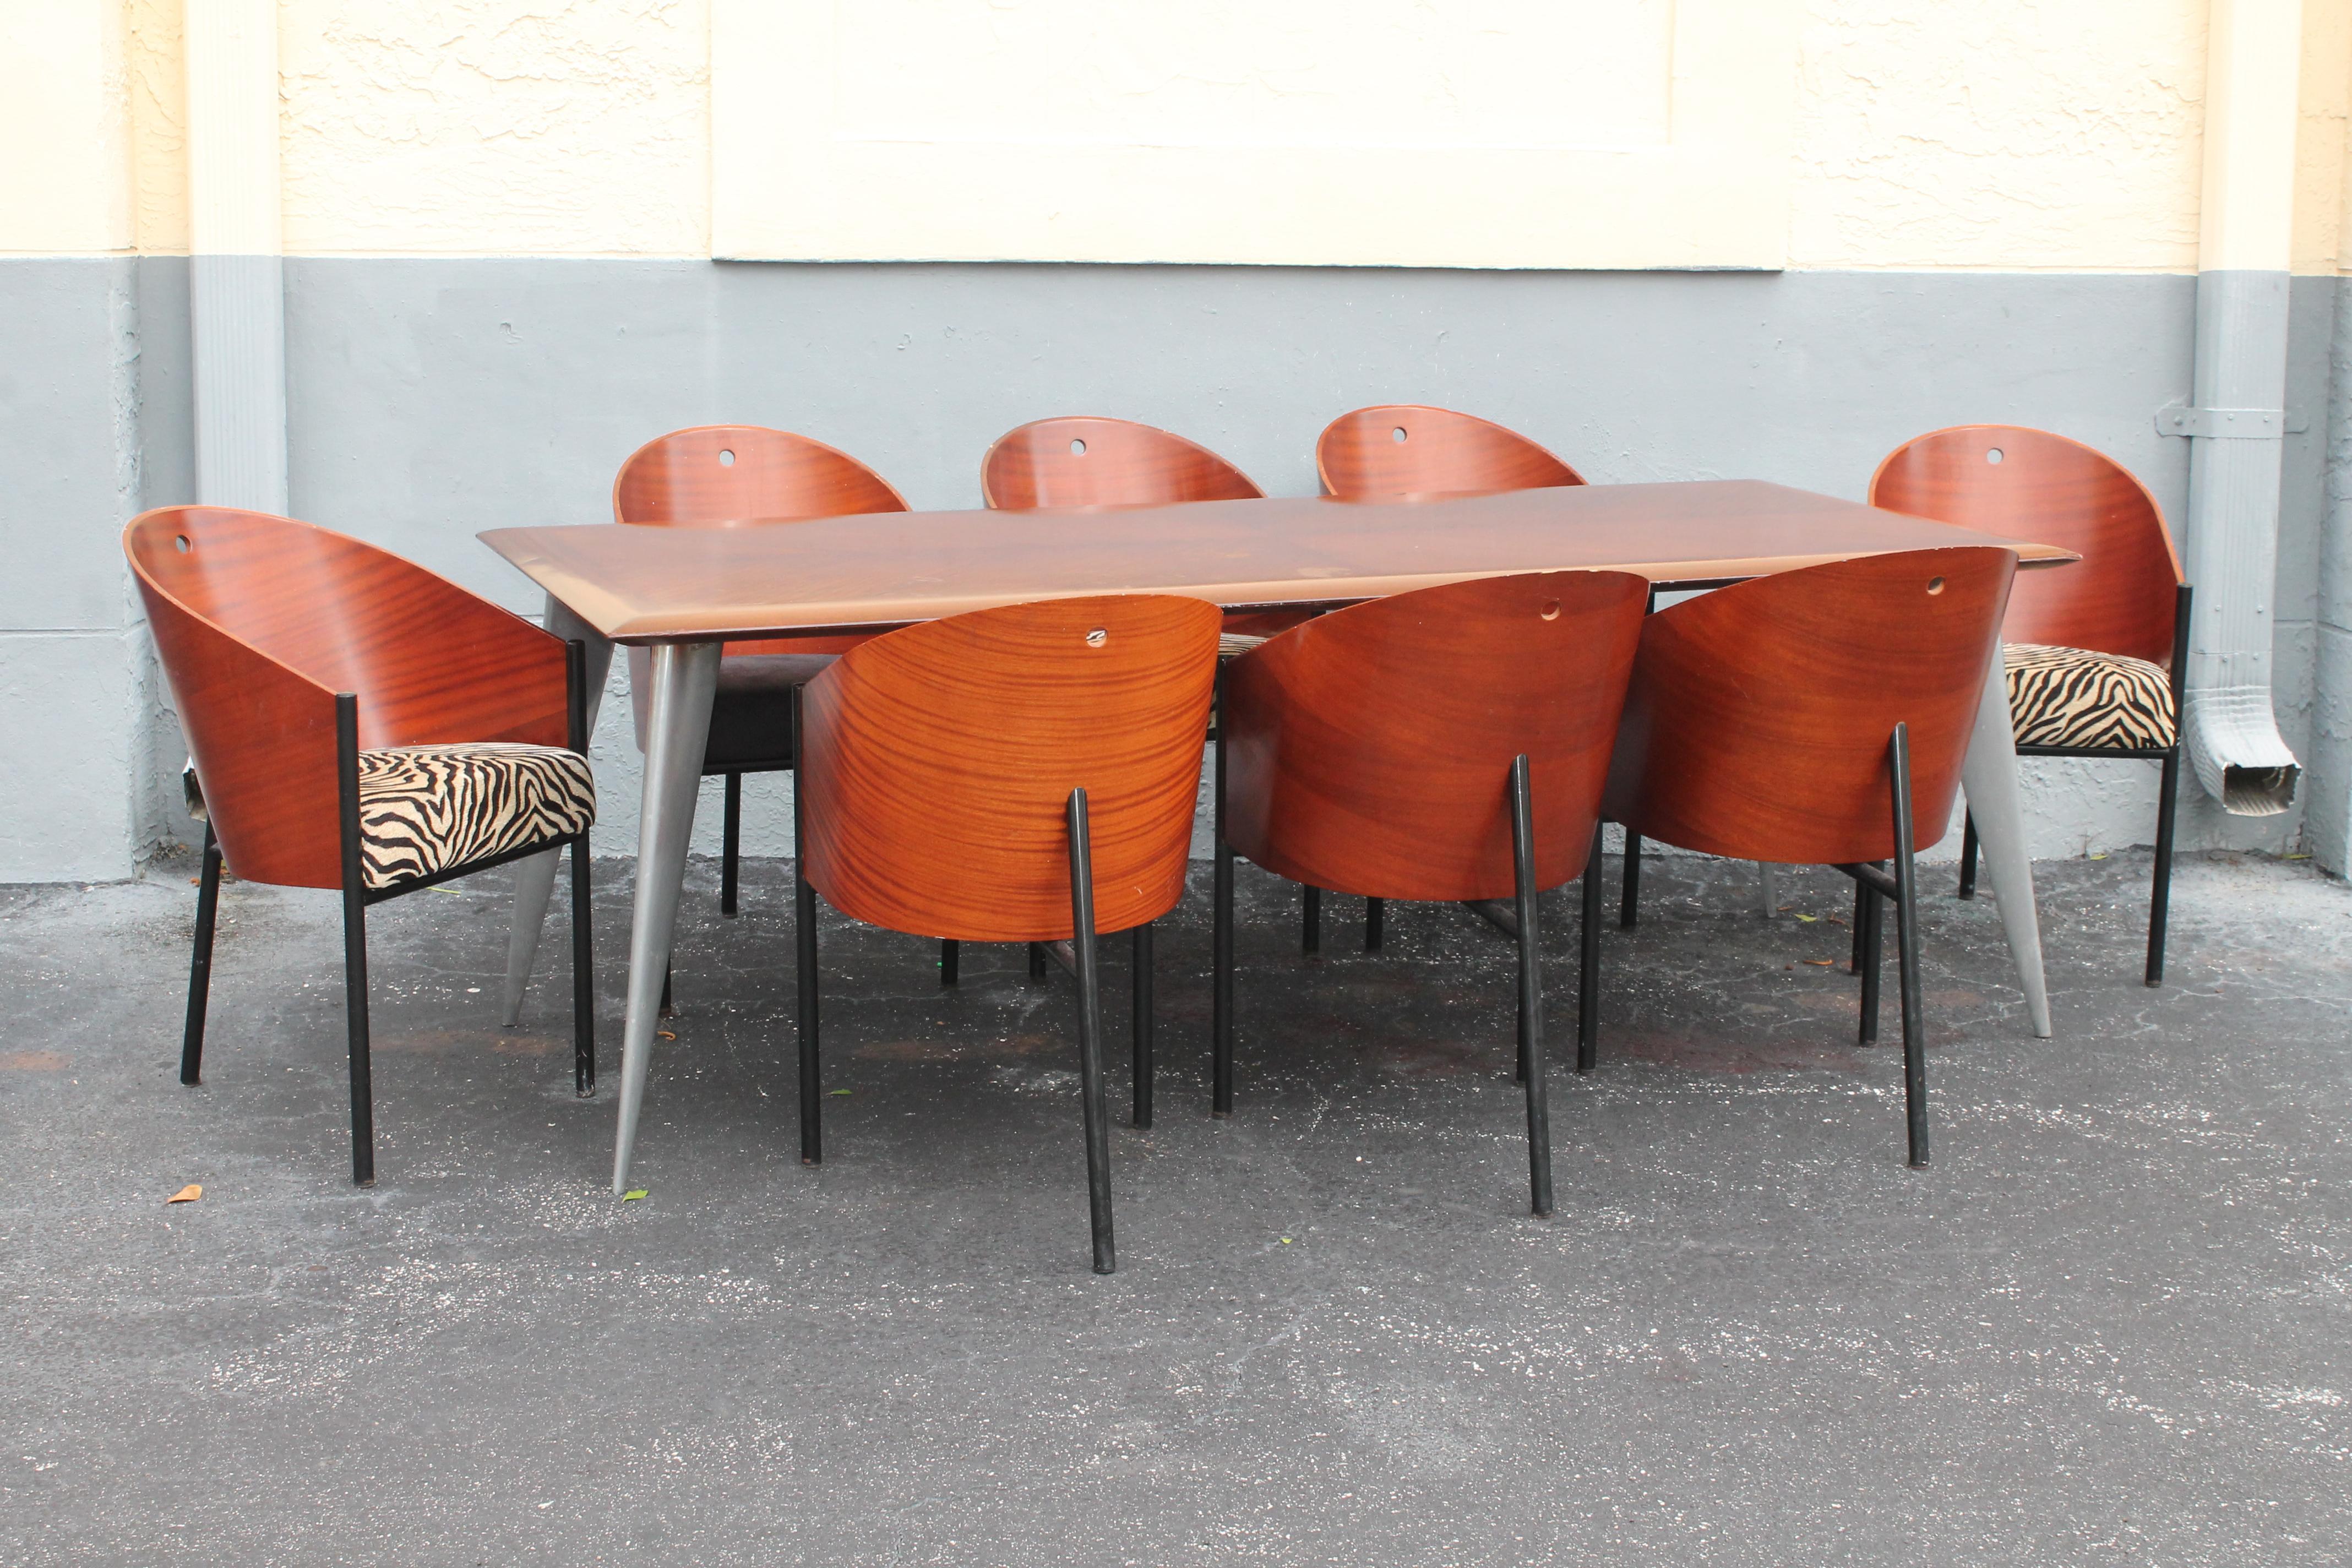 '80s Art Deco 9 Piece Dining Set Signed by Philippe Starck 8 Chairs+Dining Table For Sale 5